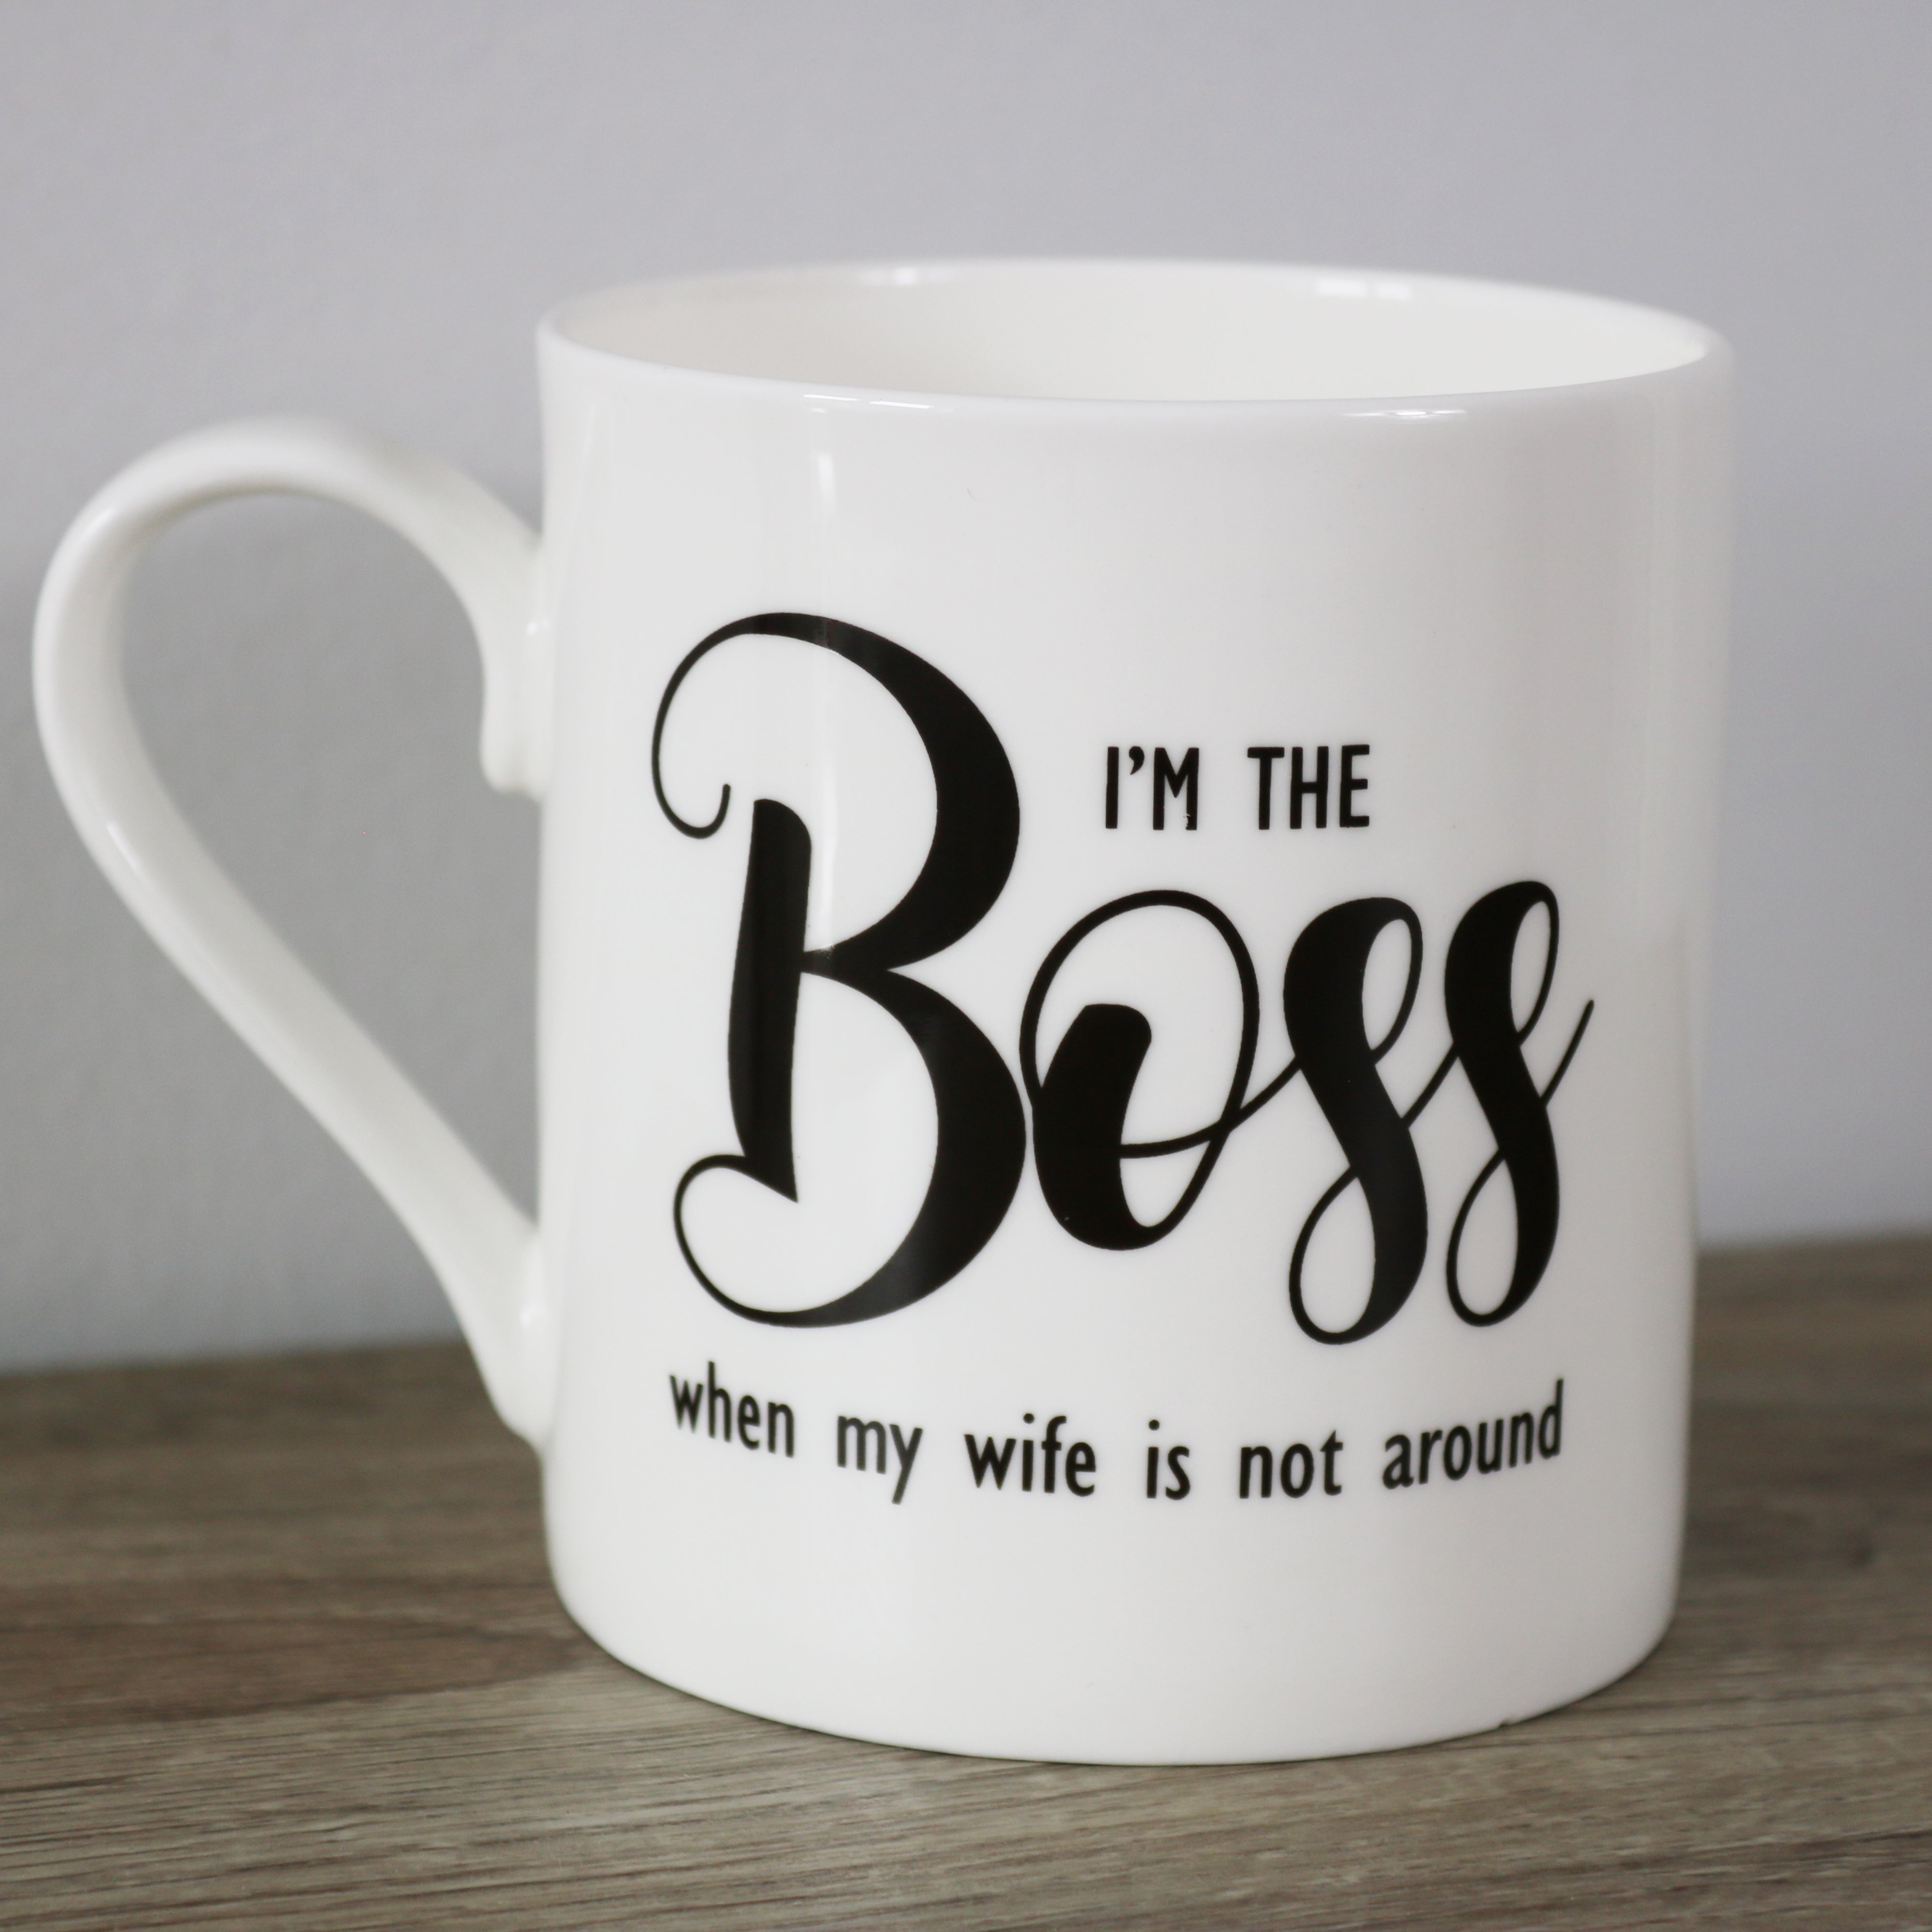 I'm The Boss When My Wife is Not Around